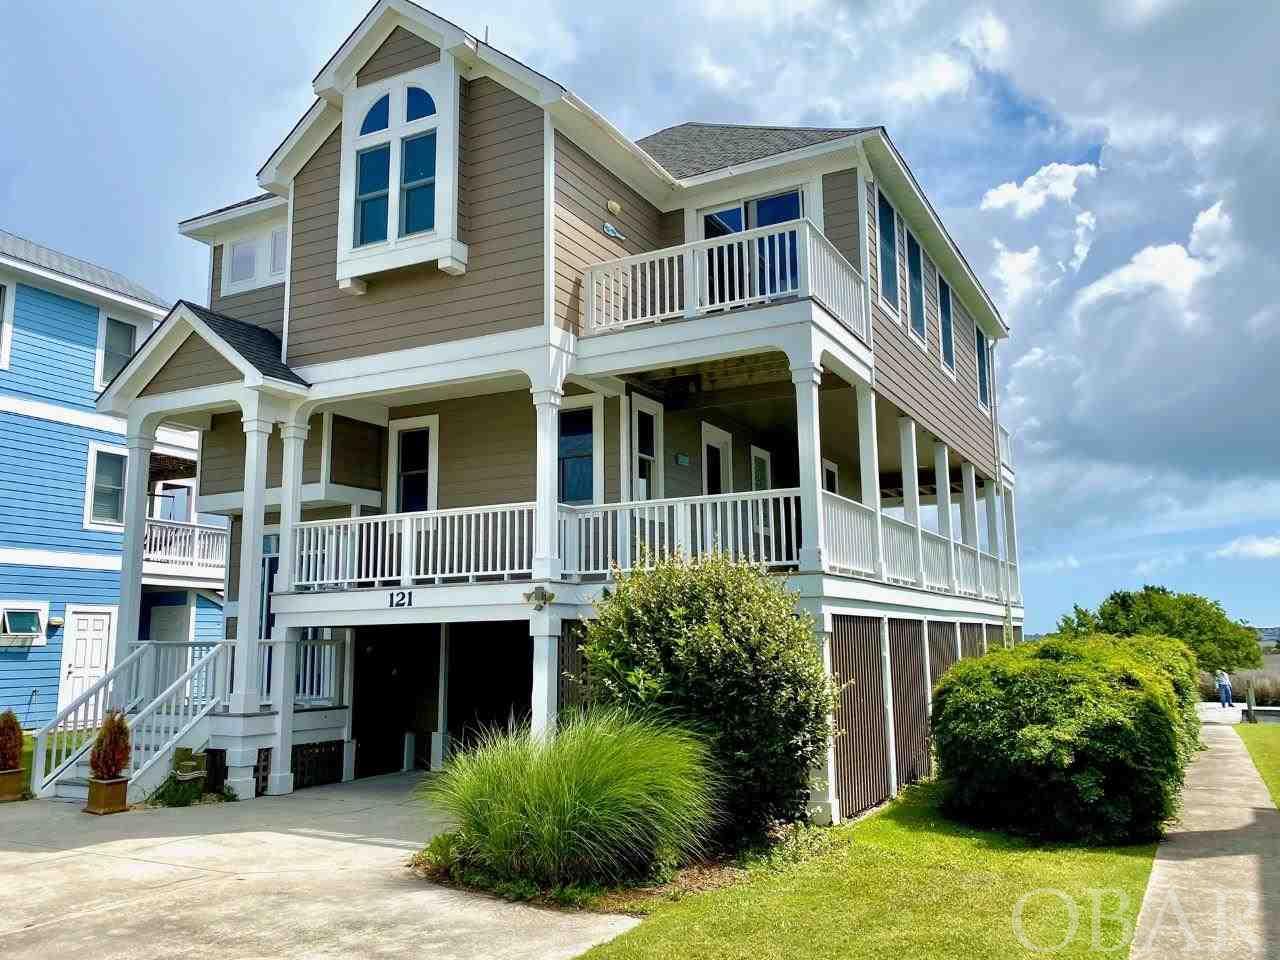 Looking for a canalfront home, look no further! This beautiful canalfront home with approximately 50ft of dock/boardwalk in the Peninsula subdivision of Manteo is the perfect home for morning sunrises. The Peninsula is a hidden gem offering seclusion and tranquility just minutes from downtown Manteo. This home boasts two masters, one on each level. It features stained glass overhead lighting in upstairs master and living room. The living room's gas fireplace is surrounded by floor to ceiling stone. New interior paint, new dishwasher, new refrigerator, new oven/range, new microwave all in 2021, roof 2019, exterior paint 2018.